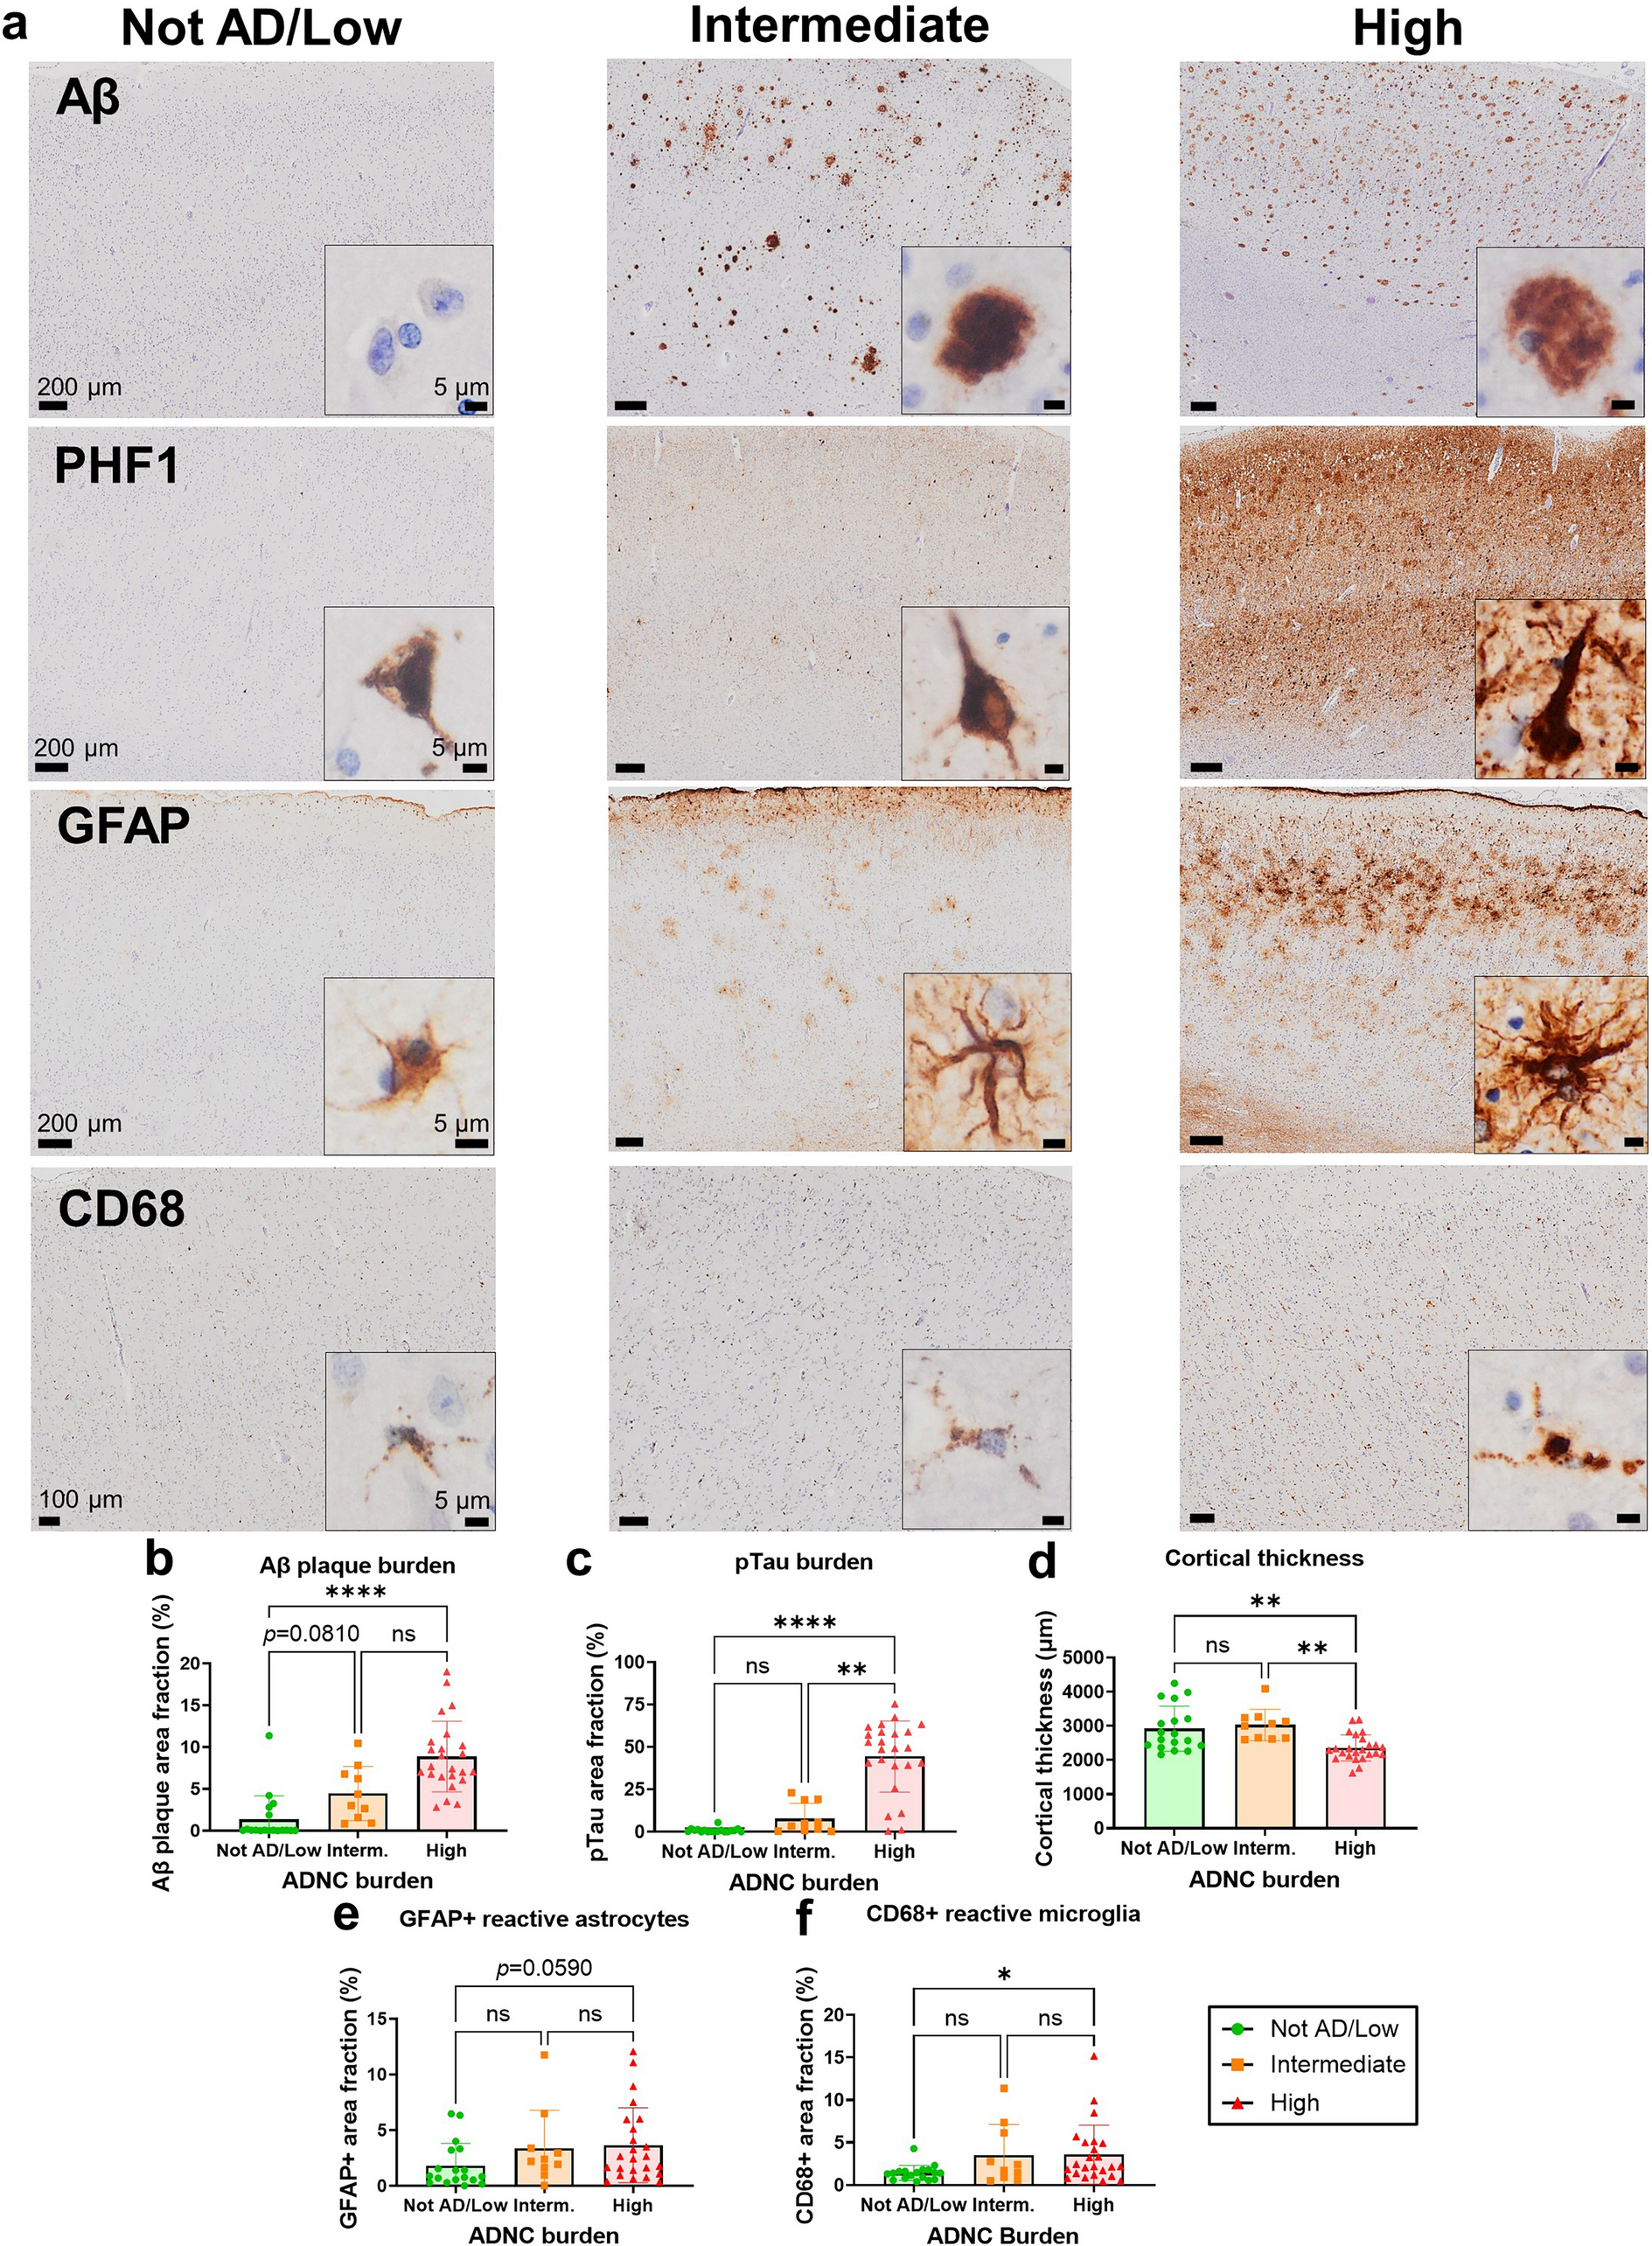 Characterization of monoamine oxidase-B (MAO-B) as a biomarker of reactive astrogliosis in Alzheimer’s disease and related dementias